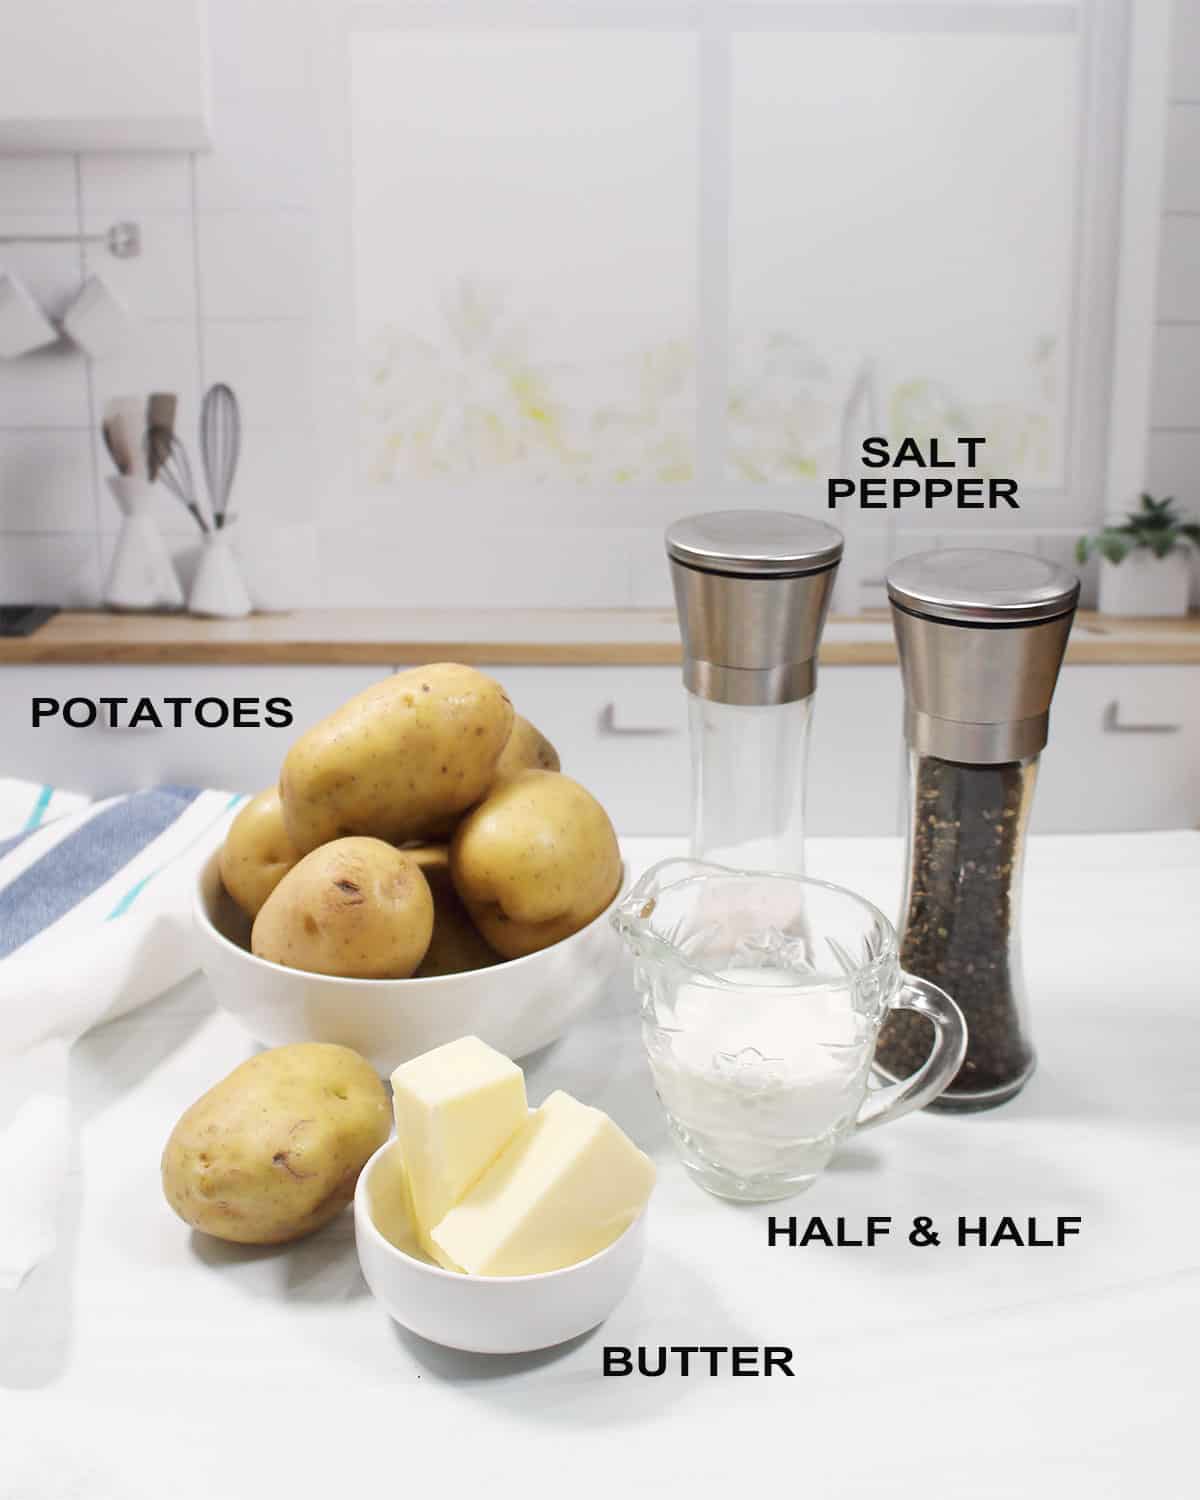 Ingredients for simple mashed potatoes.